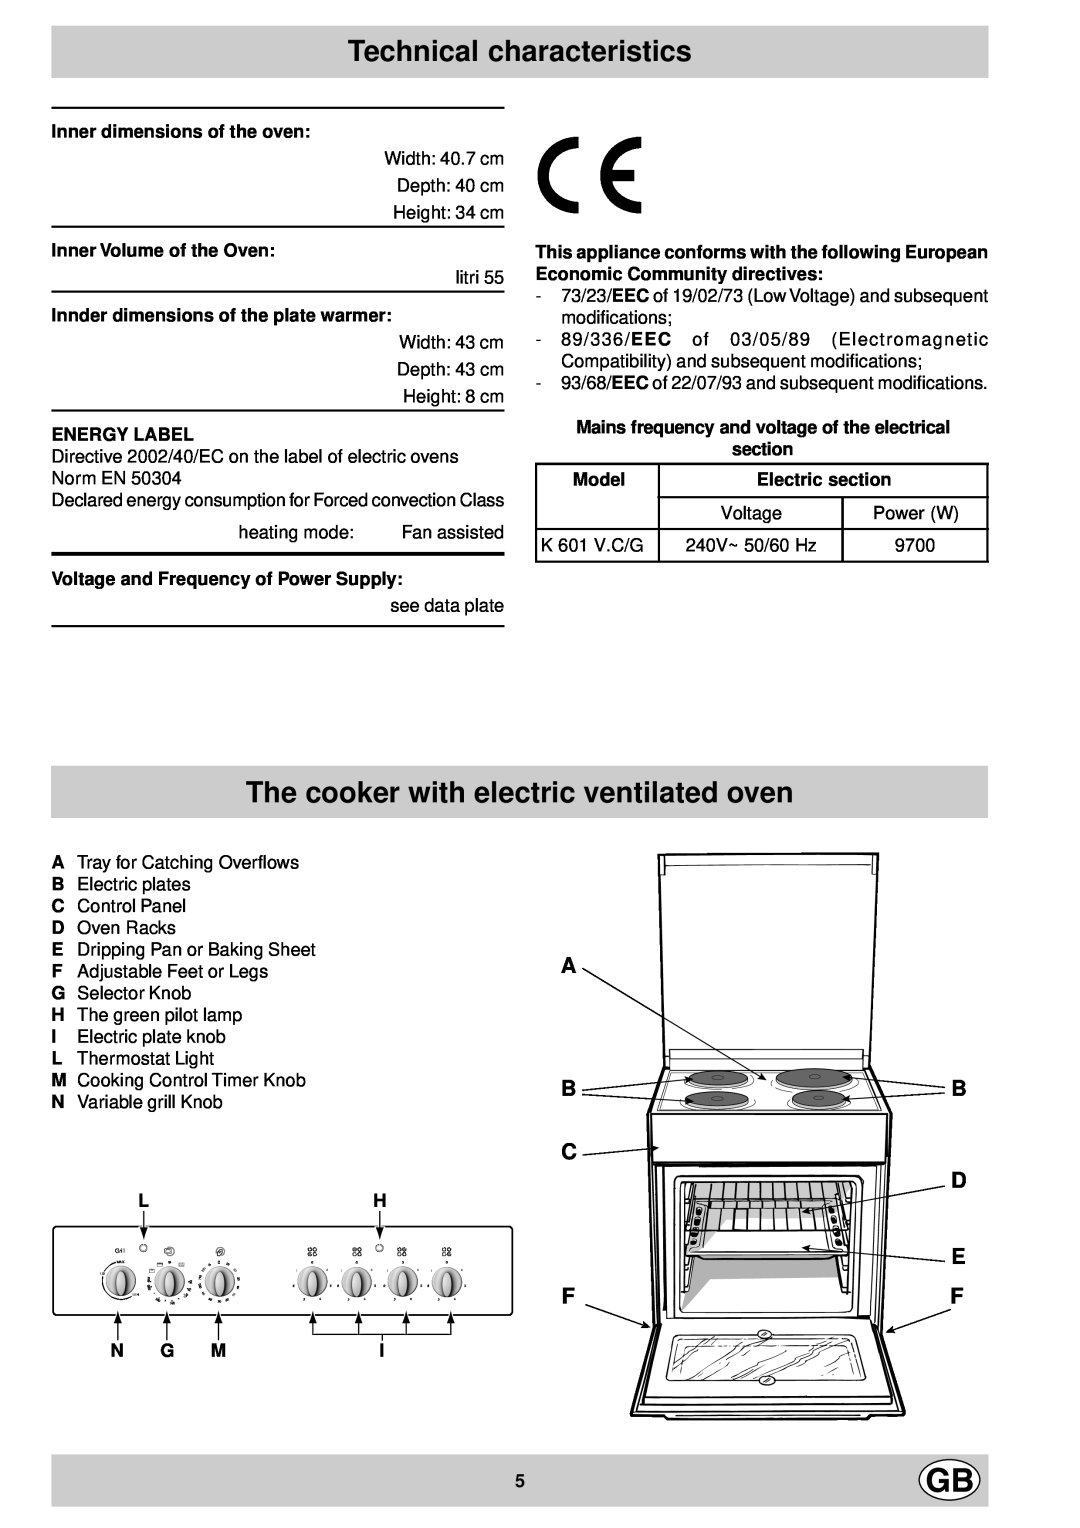 Indesit K 601 V.C/G manual Technical characteristics, The cooker with electric ventilated oven, B B 